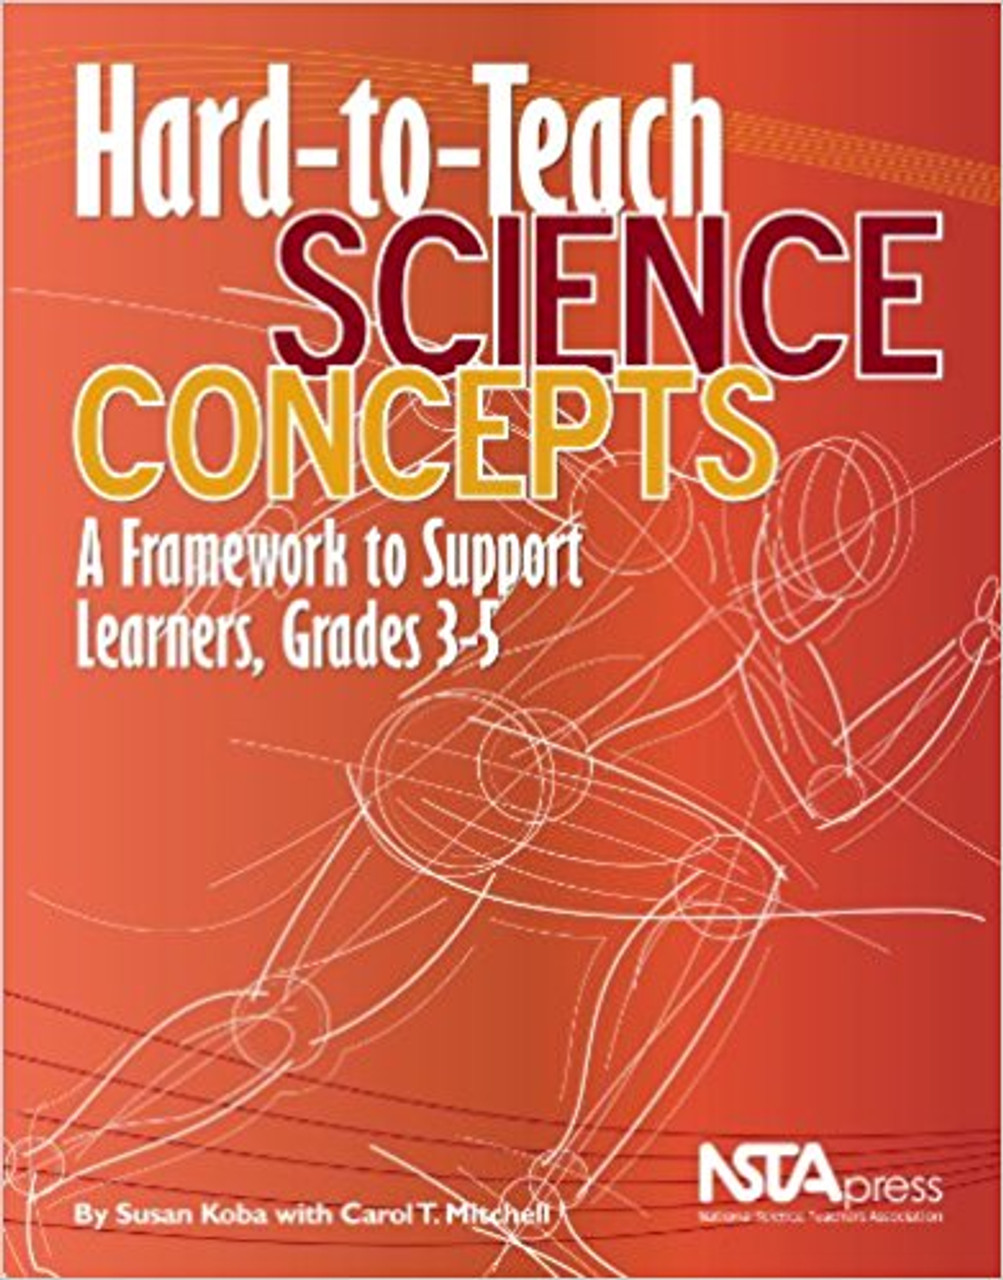 Hard-to-Teach Science Concepts: A Framework to Support Learners, Grades 3-5 by Susan B Koba